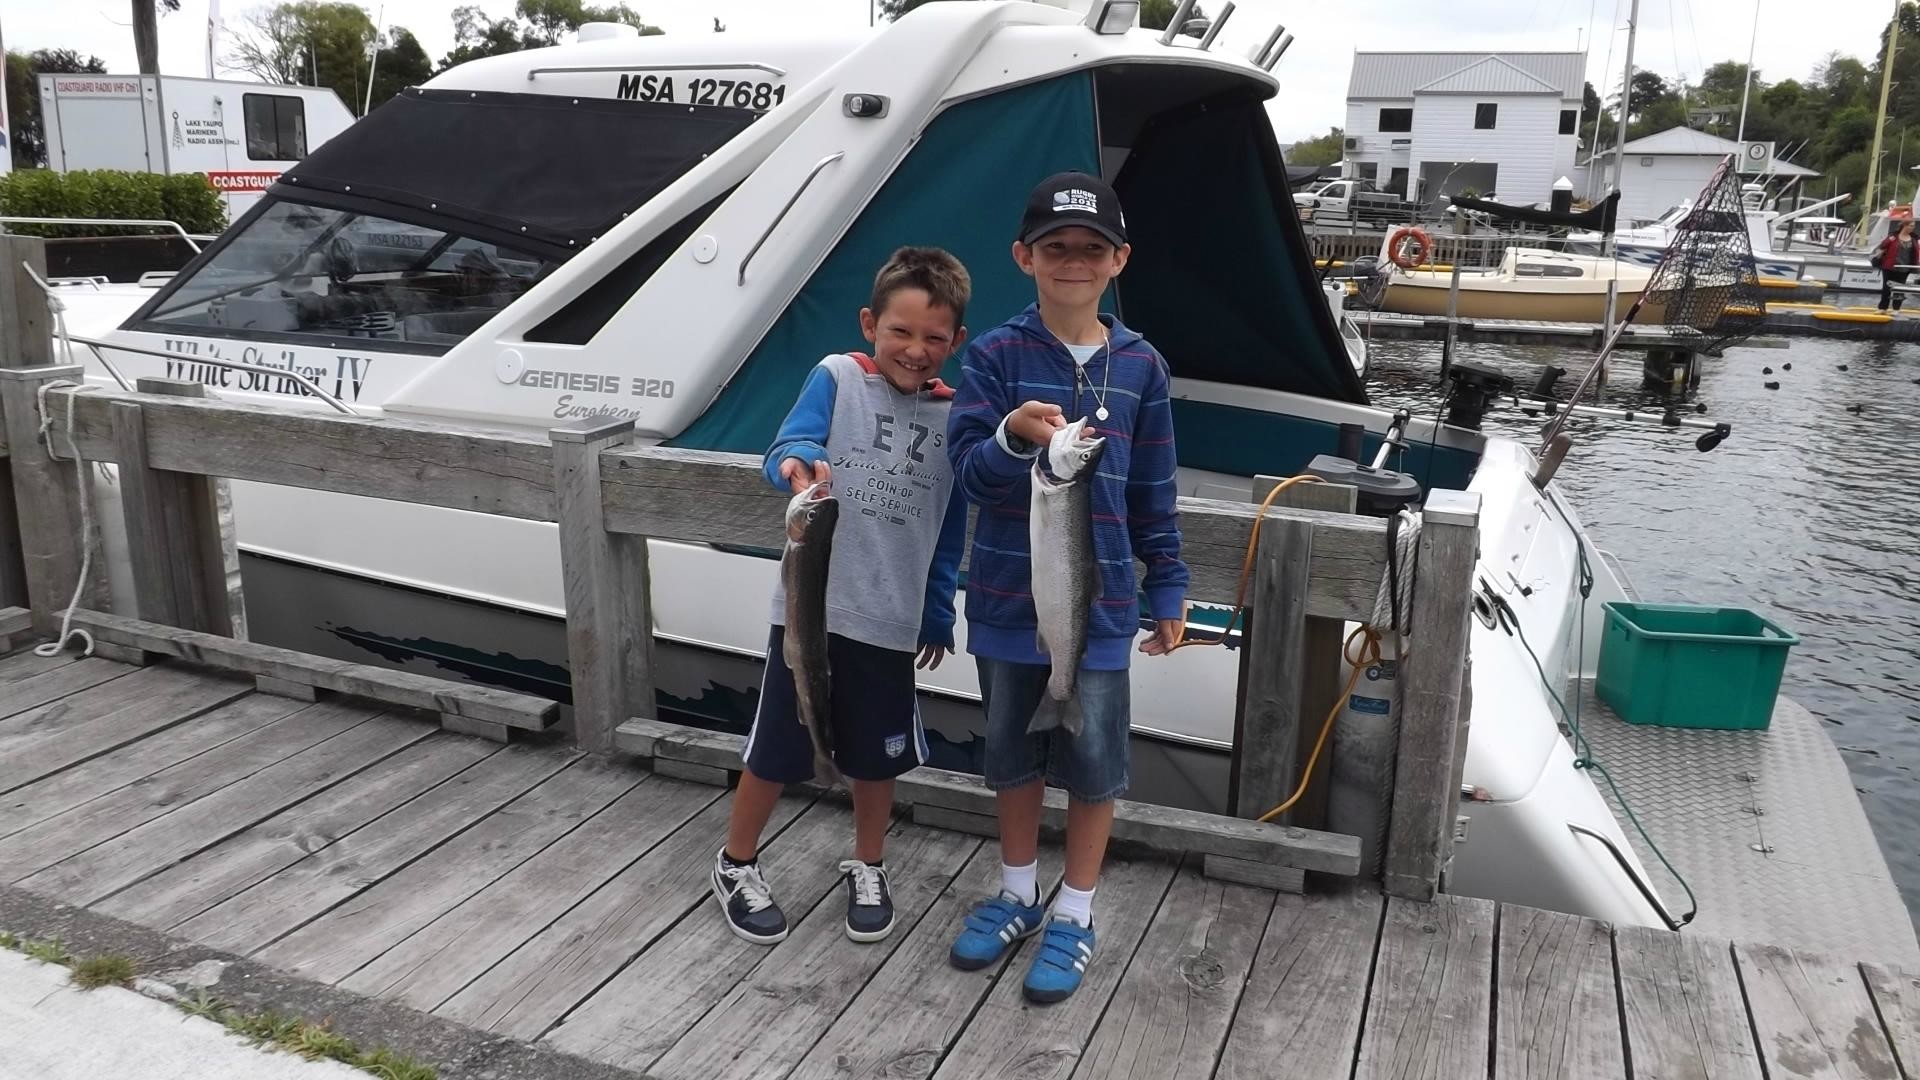 White Striker IV berth and kids with catch